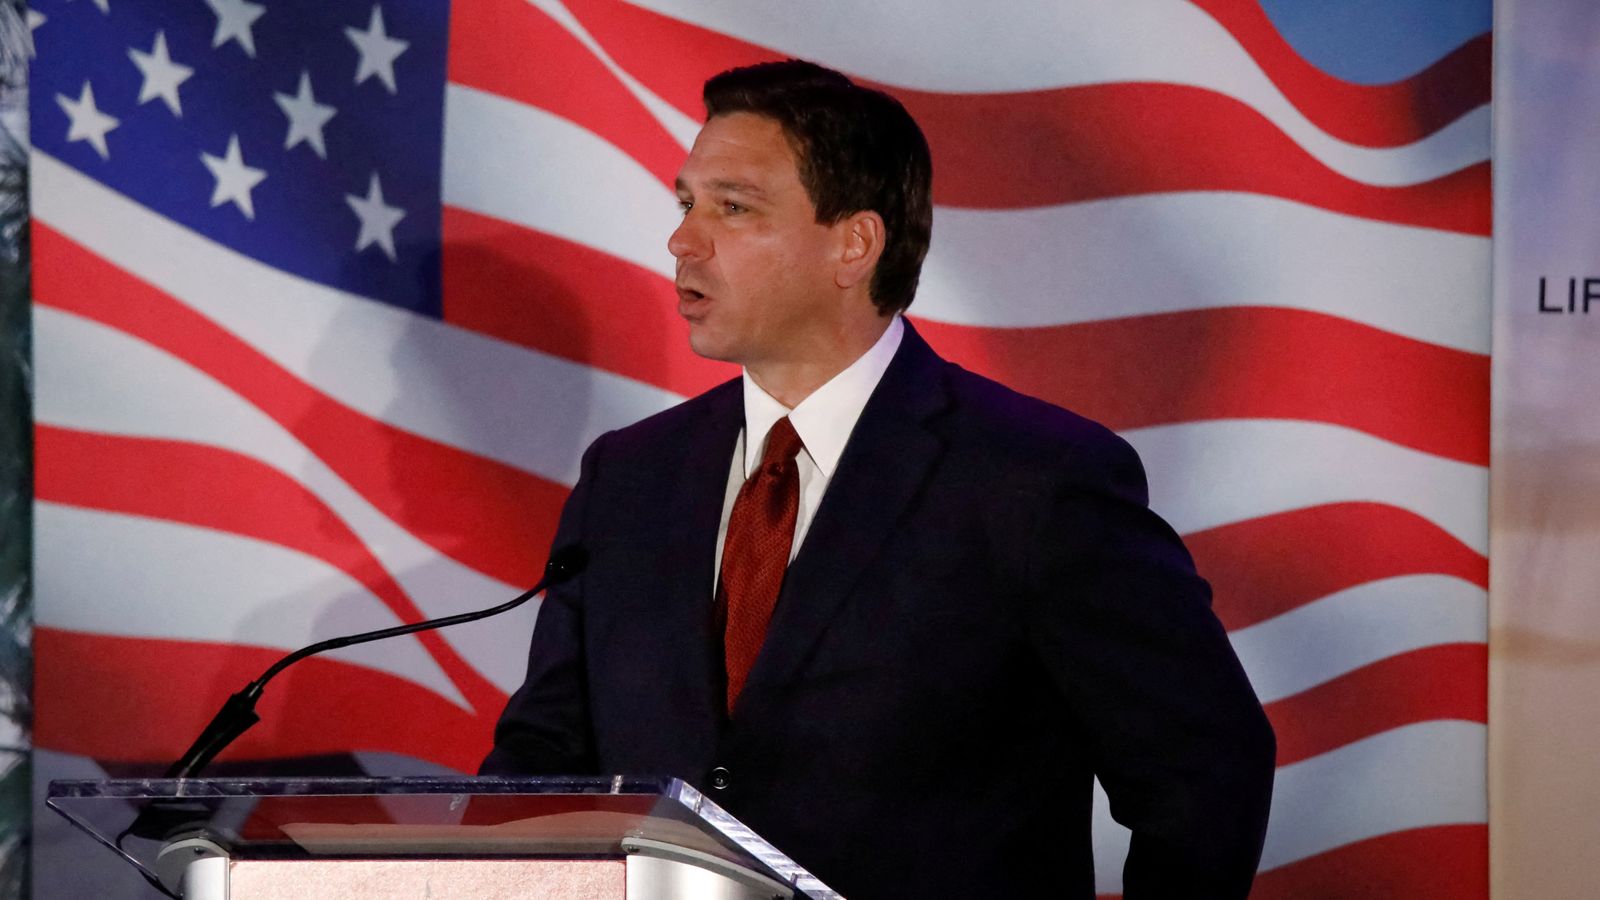 Ron DeSantis as American president is exciting for some, but frightening for others